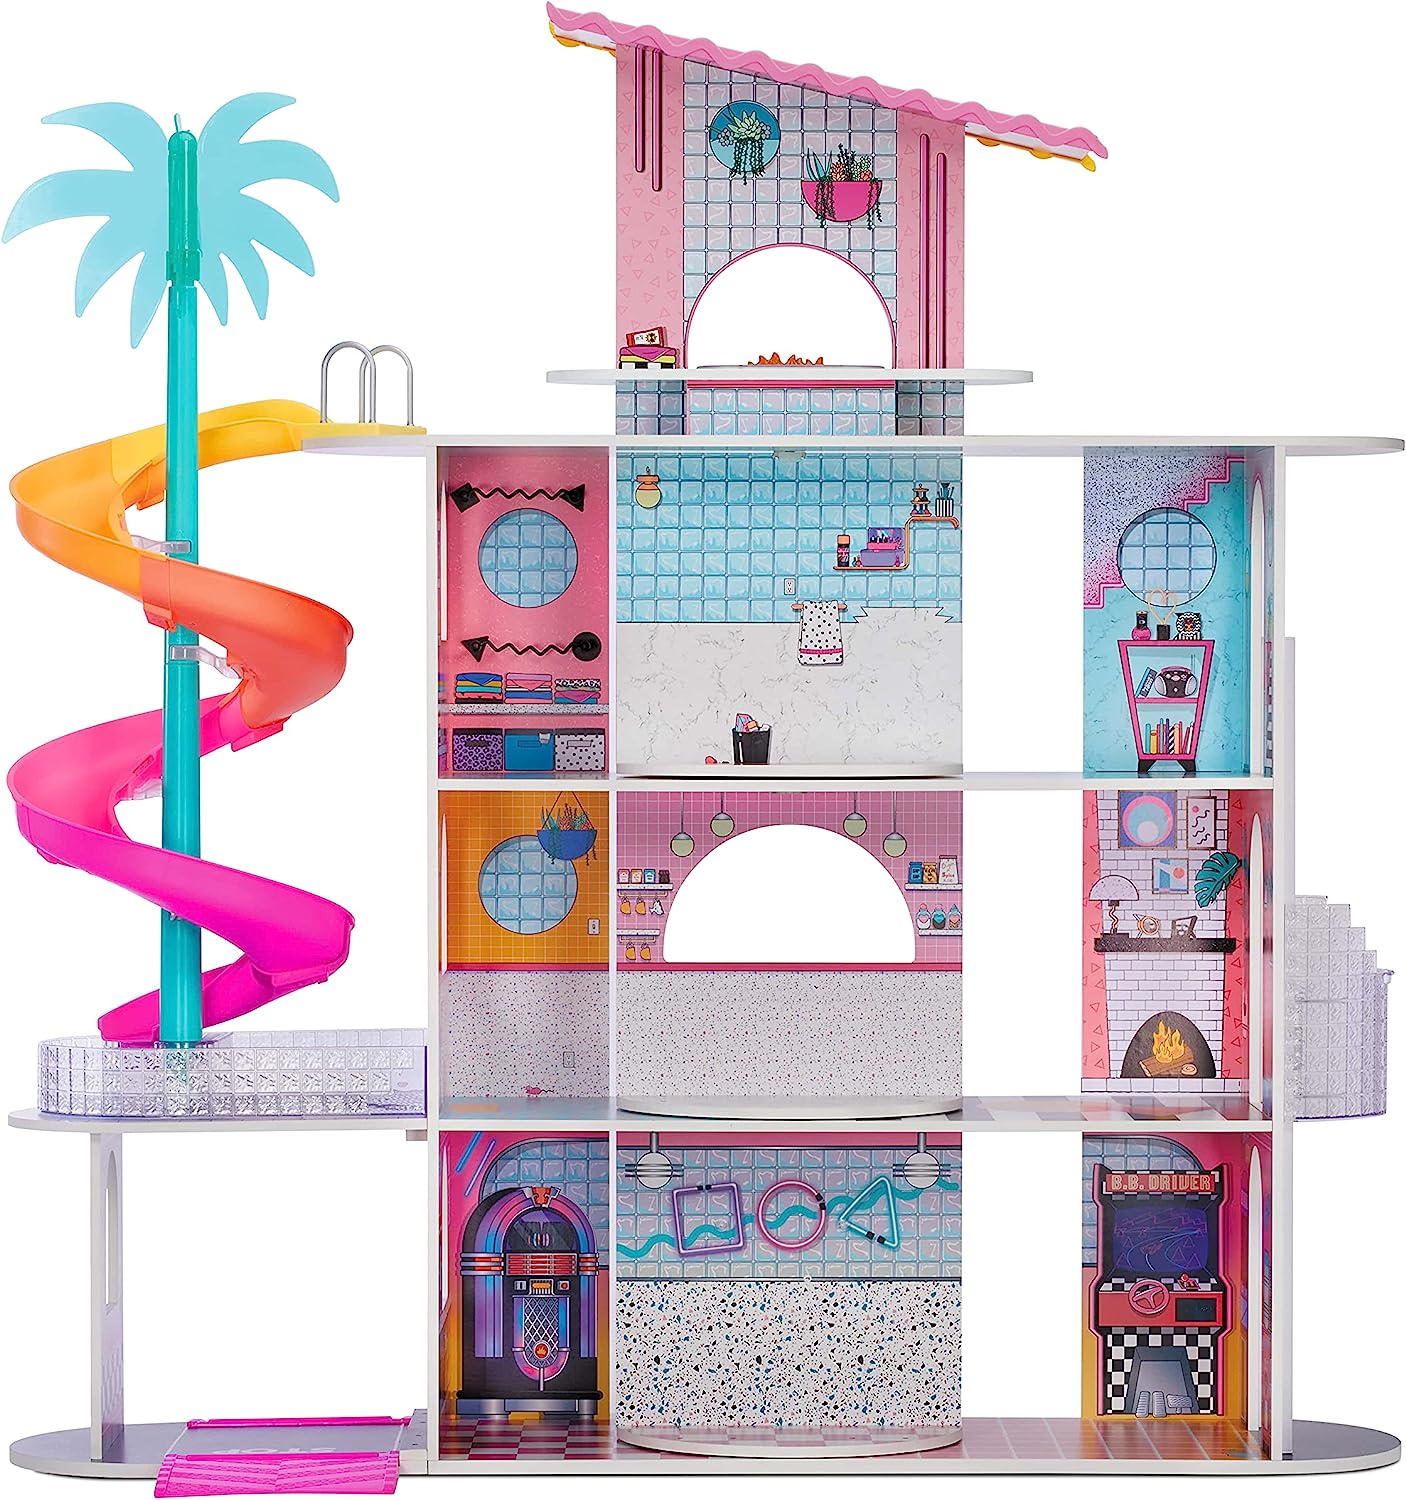 L.O.L. Surprise! OMG Fashion House Playset with 85+ Surprises, Made from Real Wood